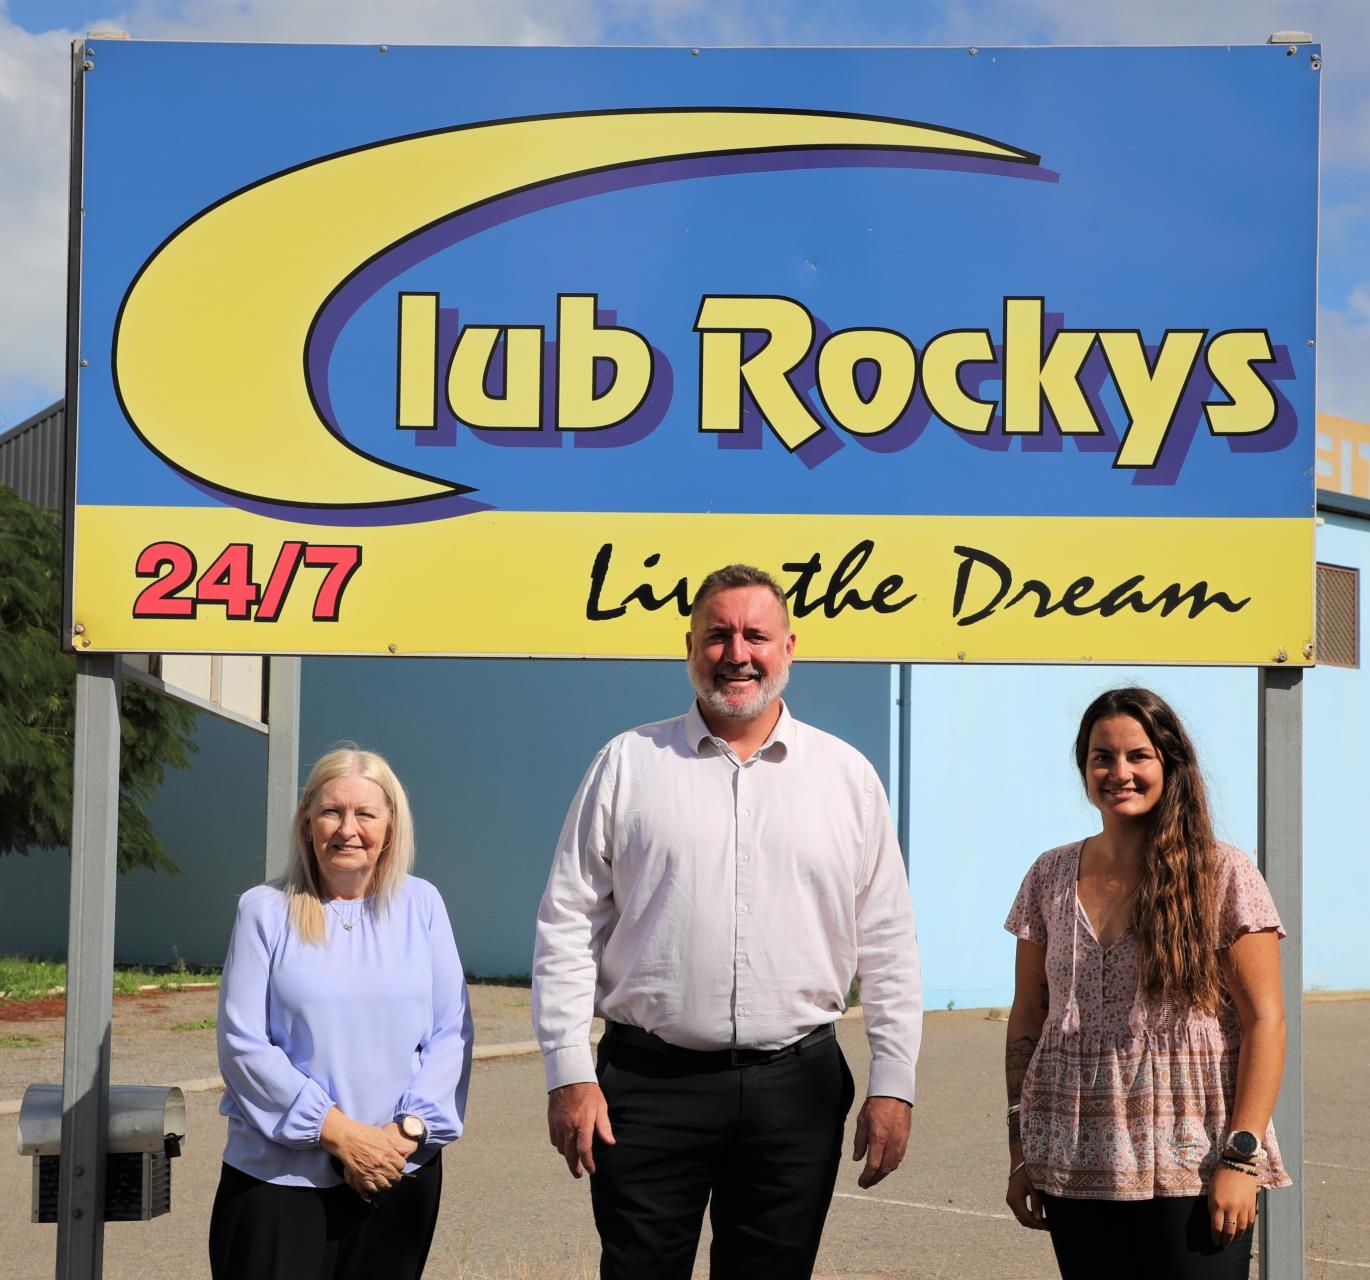 Club Rocky's acquisition 